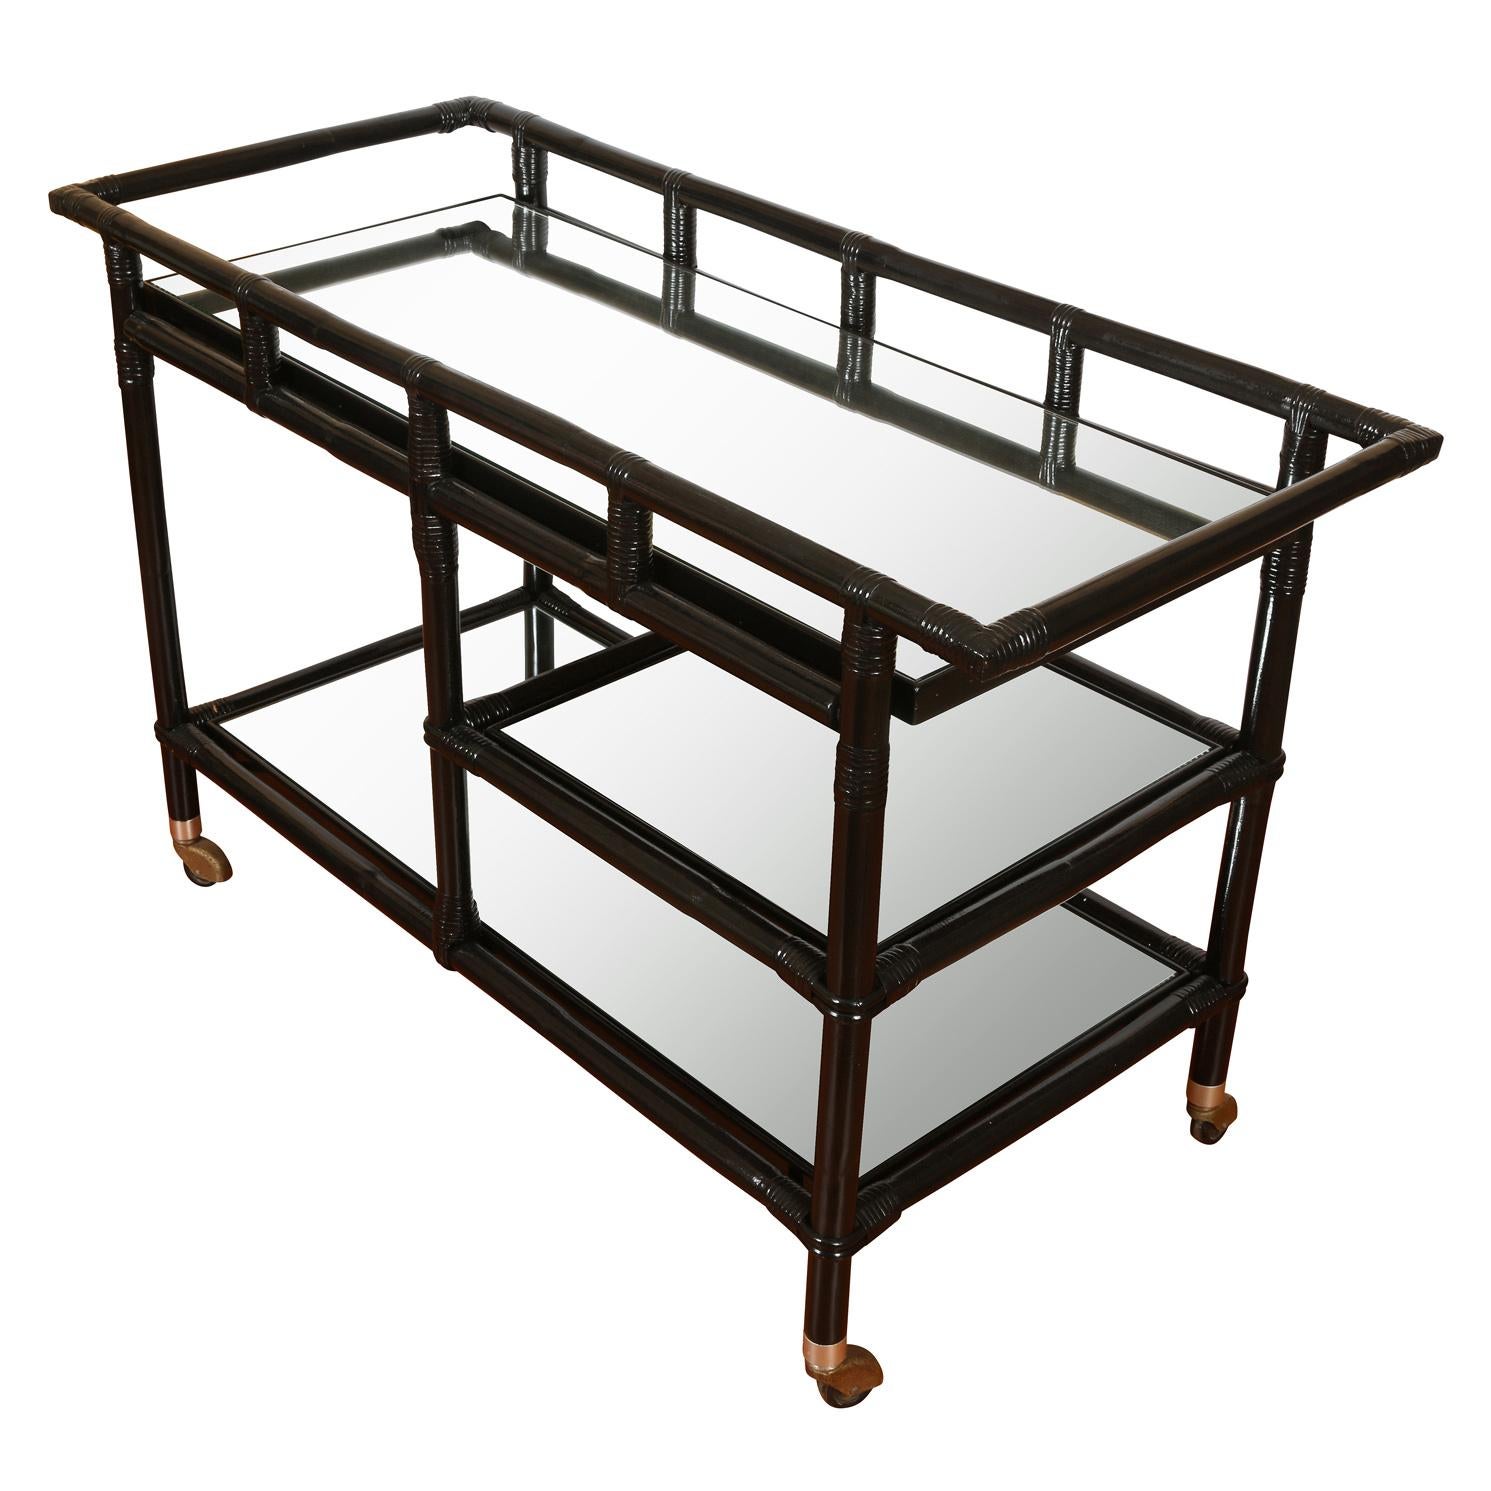 Ficks Reed black lacquered rattan bar cart with mirrored shelves,. two full width and one smaller shelf.